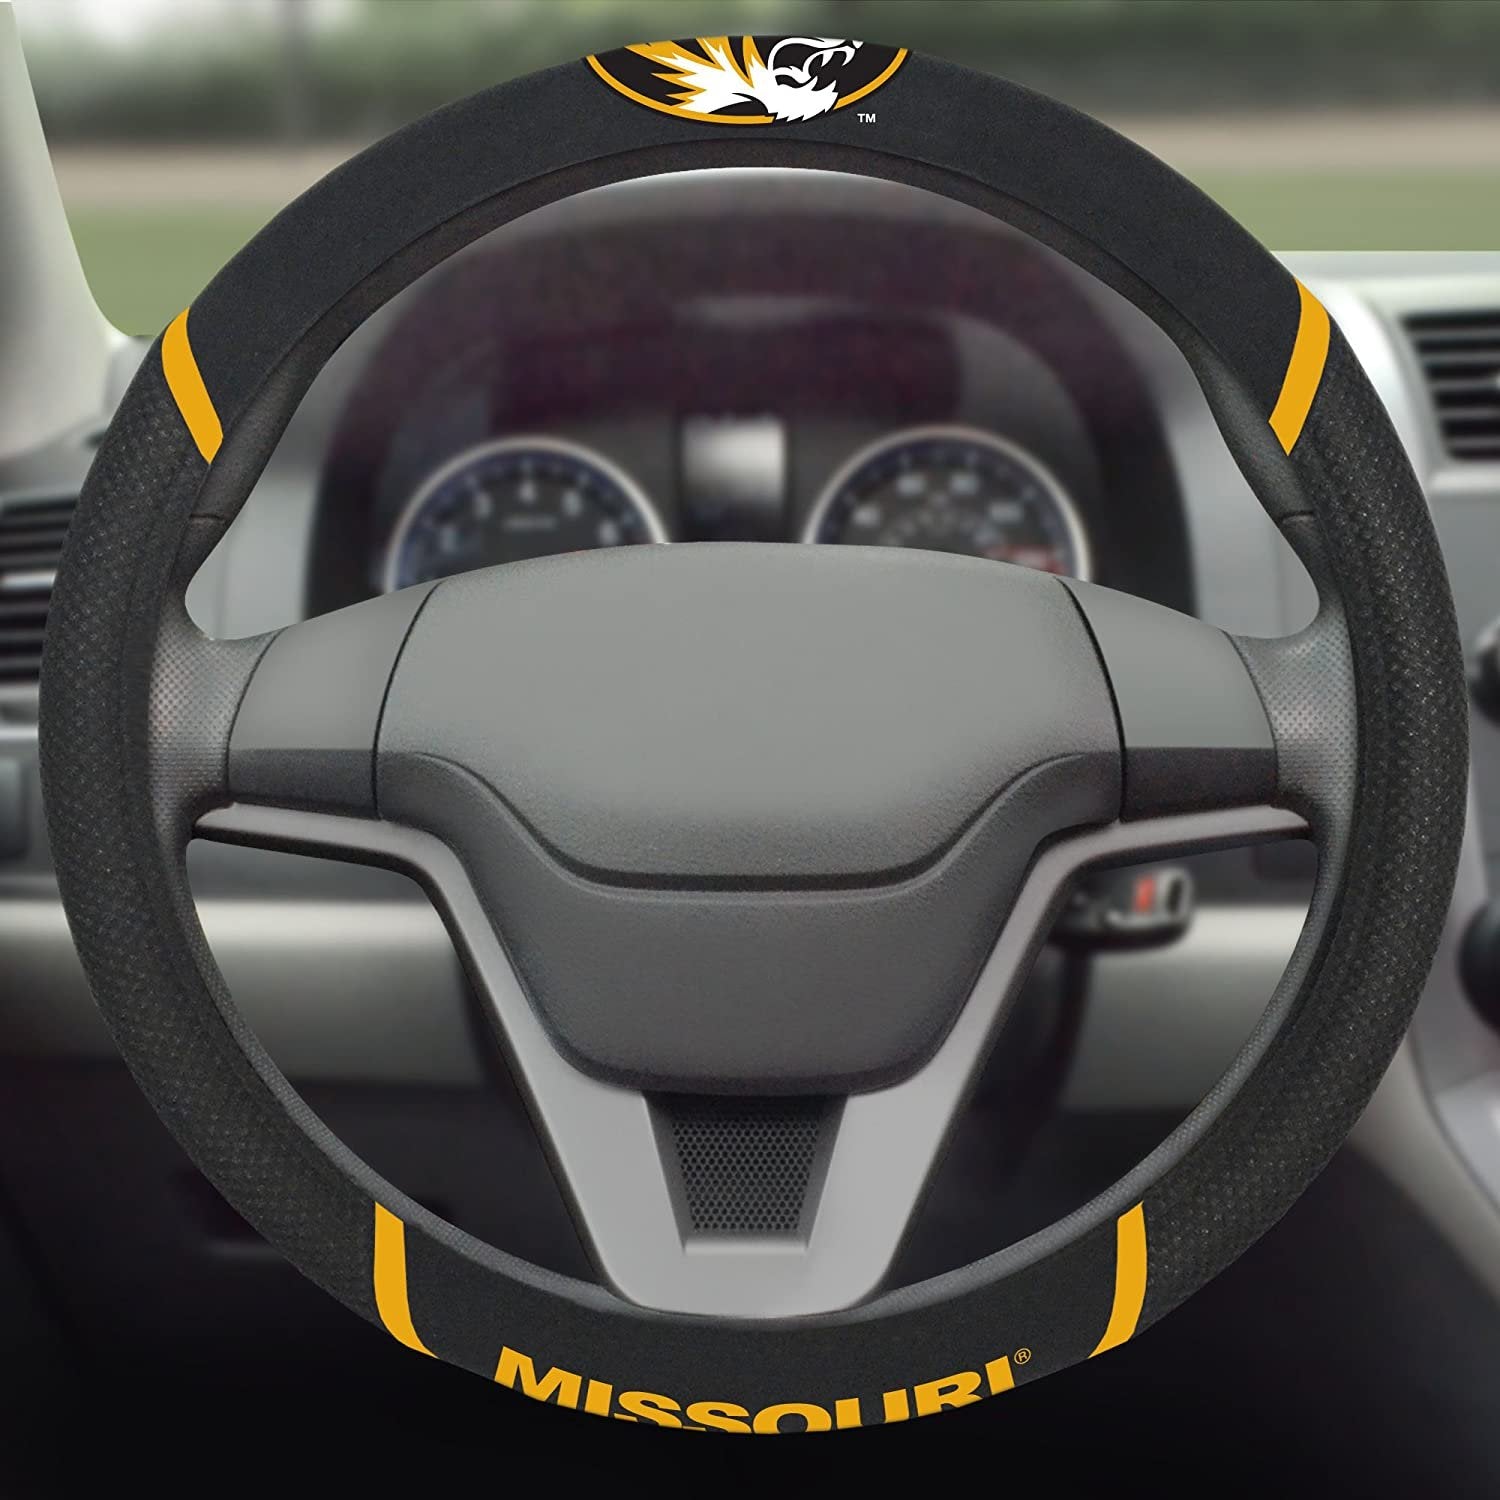 Missouri Tigers Steering Wheel Cover Premium Embroidered Black 15 Inch University of